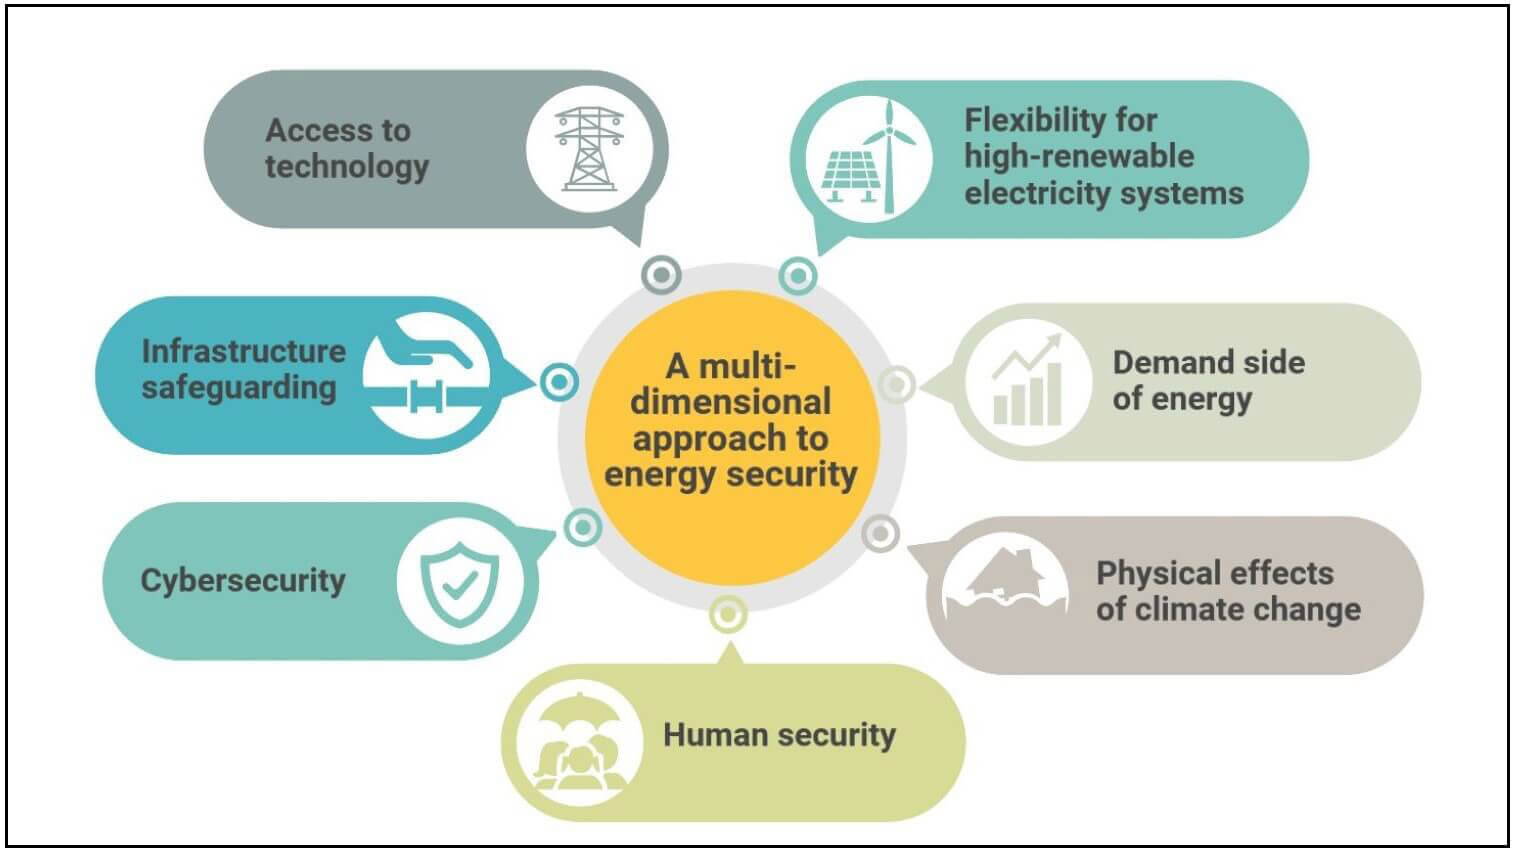 Figure 1 Dimensions of energy security